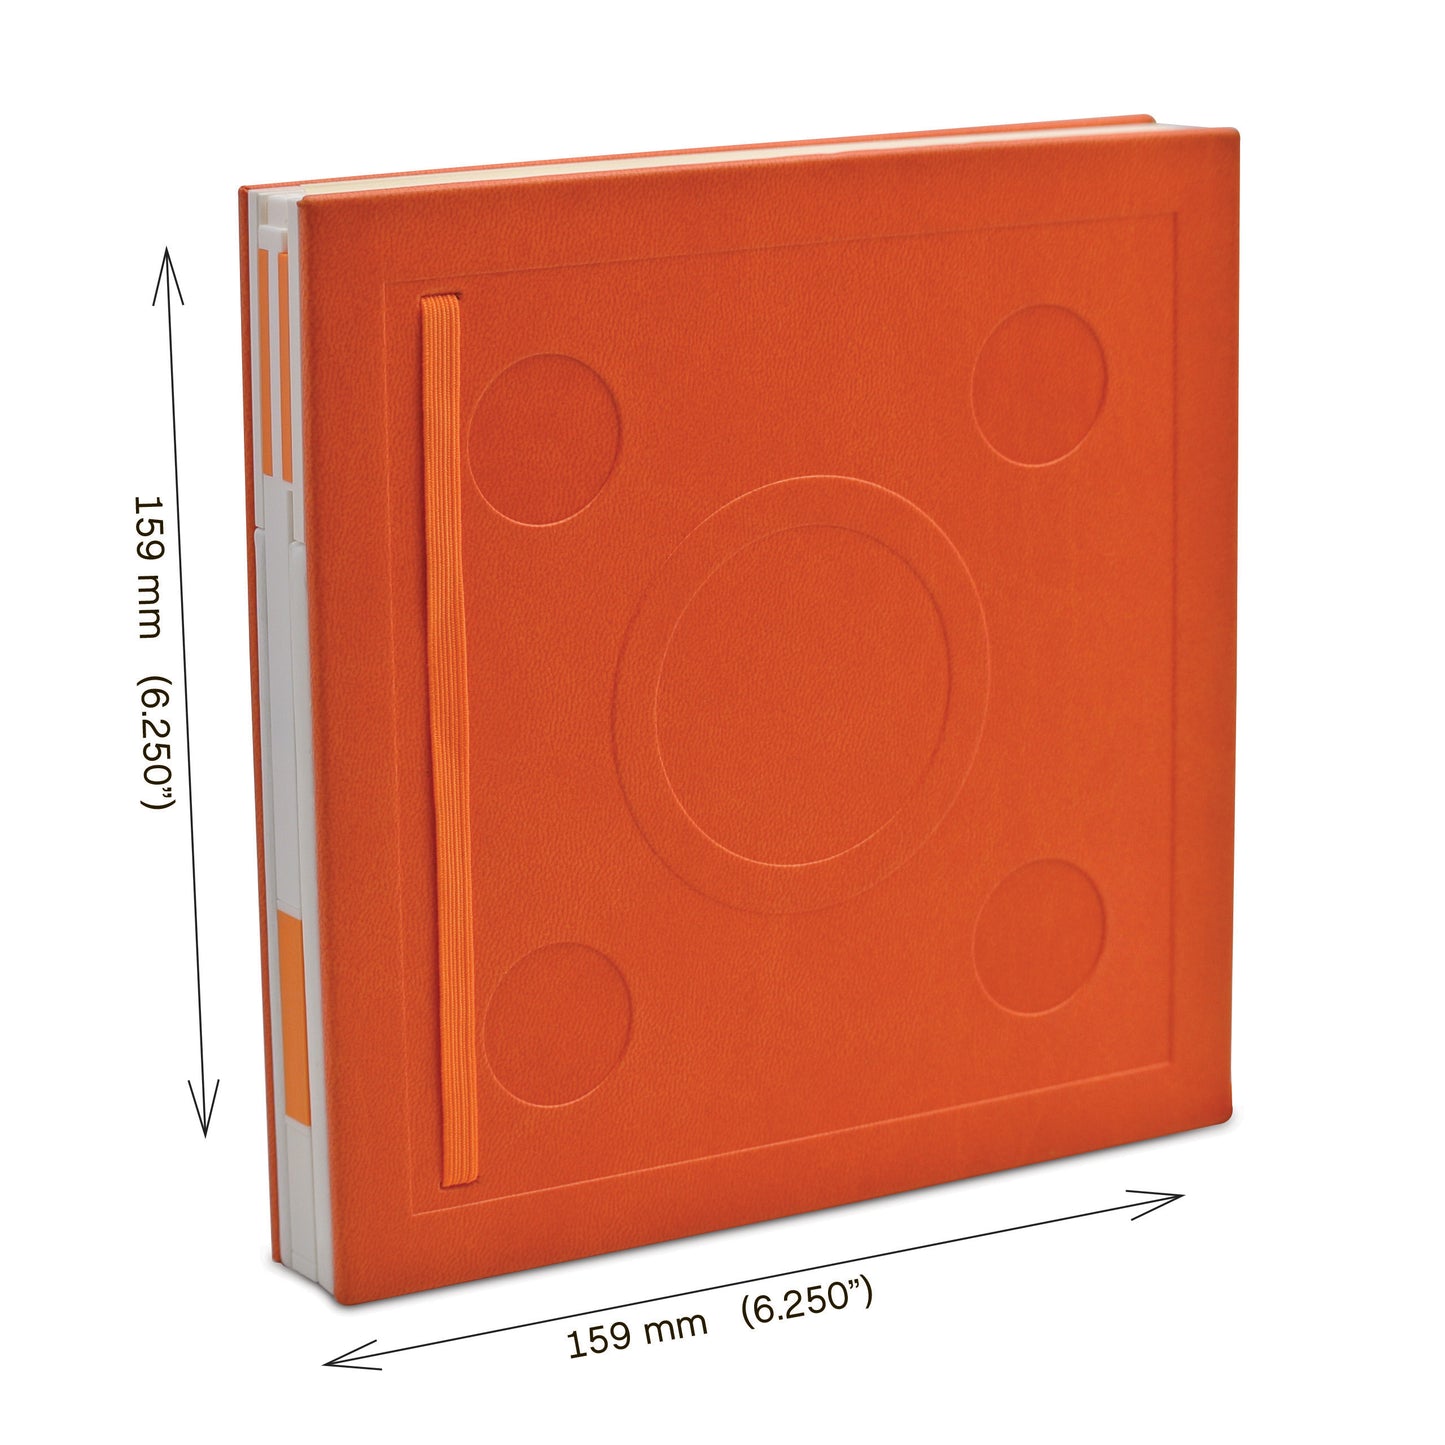 IQ LEGO® 2.0 Stationery Locking Notebook with Color-Matched Gel Pen - Orange (52440)